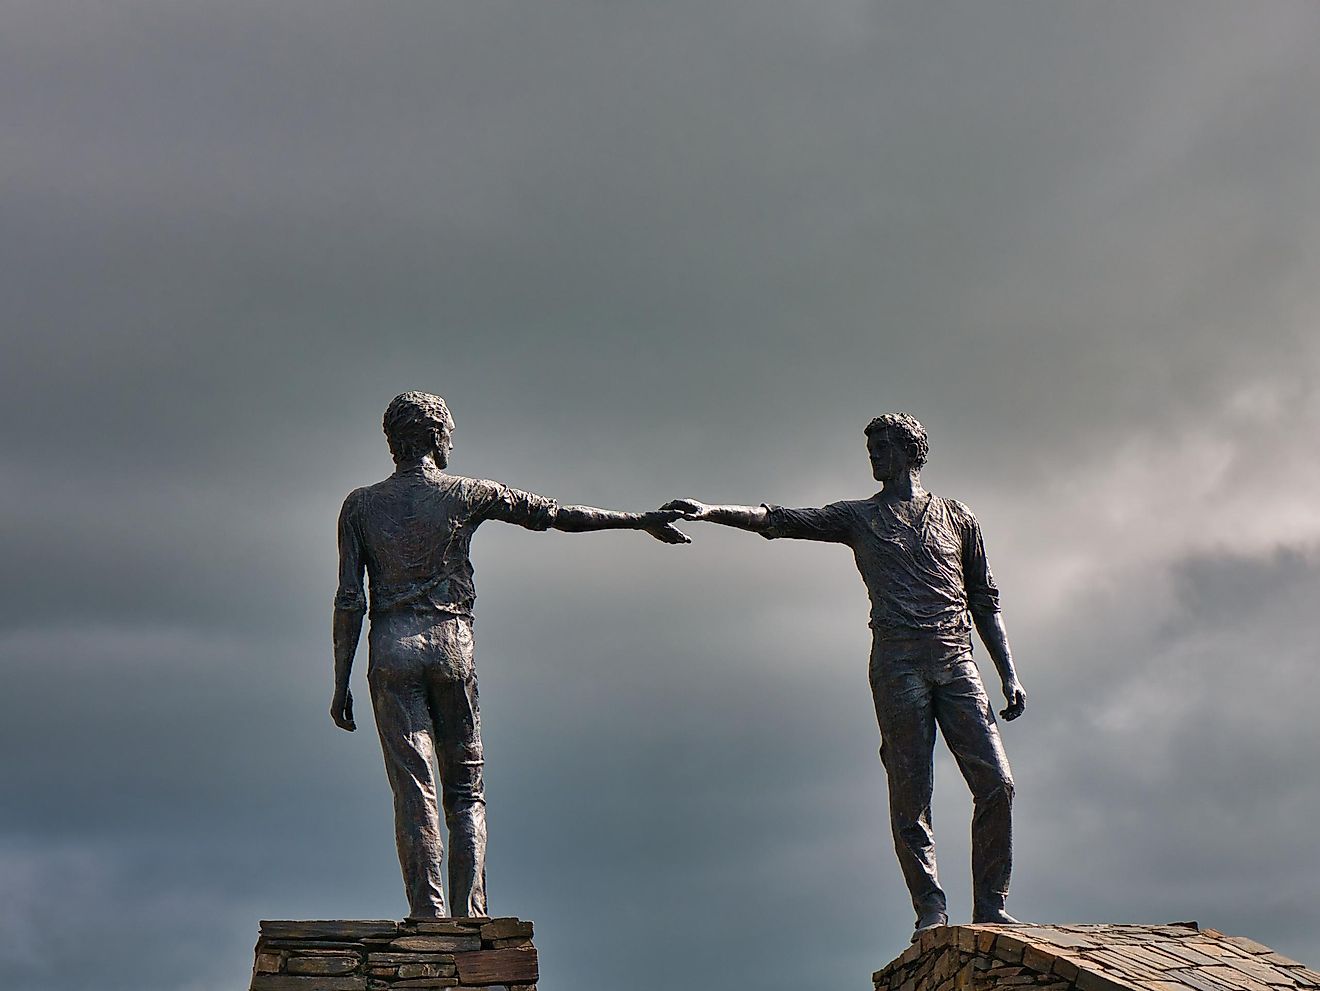 Hands Across the Divide - a sculpture on the western side of the Craigavon Bridge in Derry ~ Londonderry, NI, symbolising reconciliation after the Troubles.